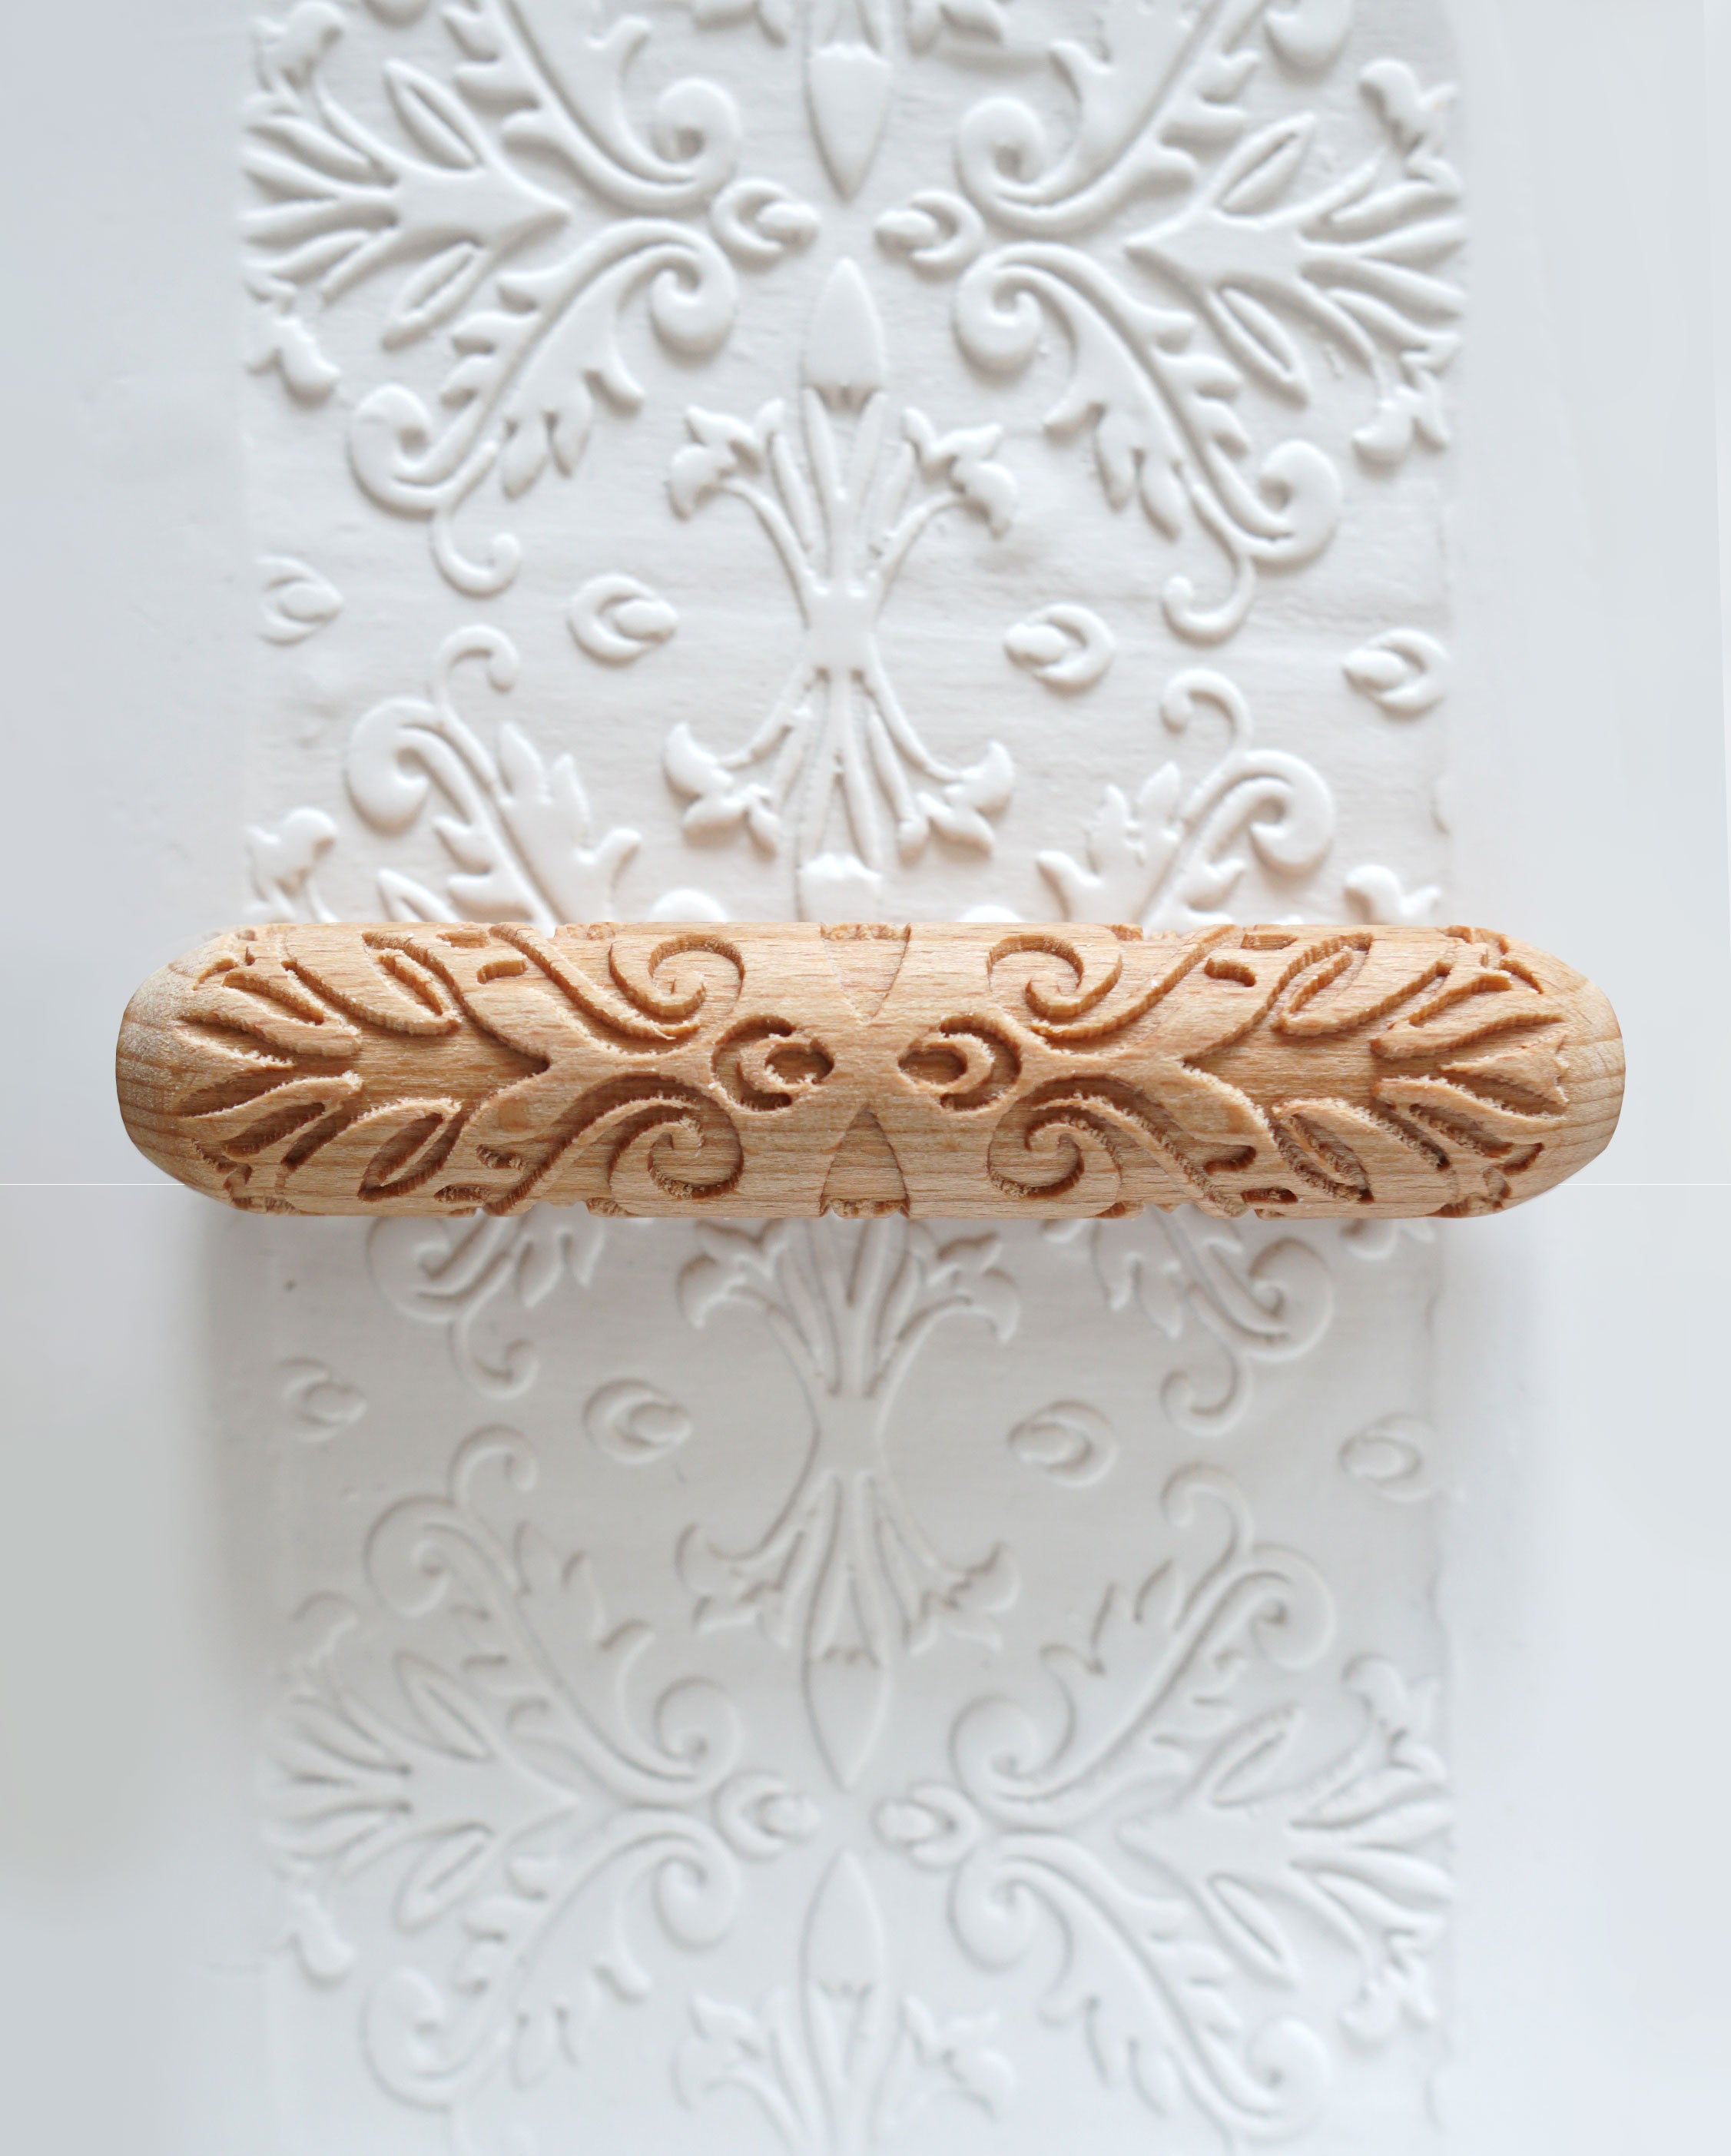 Clay Texture Roller - Floral Frenzy - Sanbao Studio - ChinaClayArt